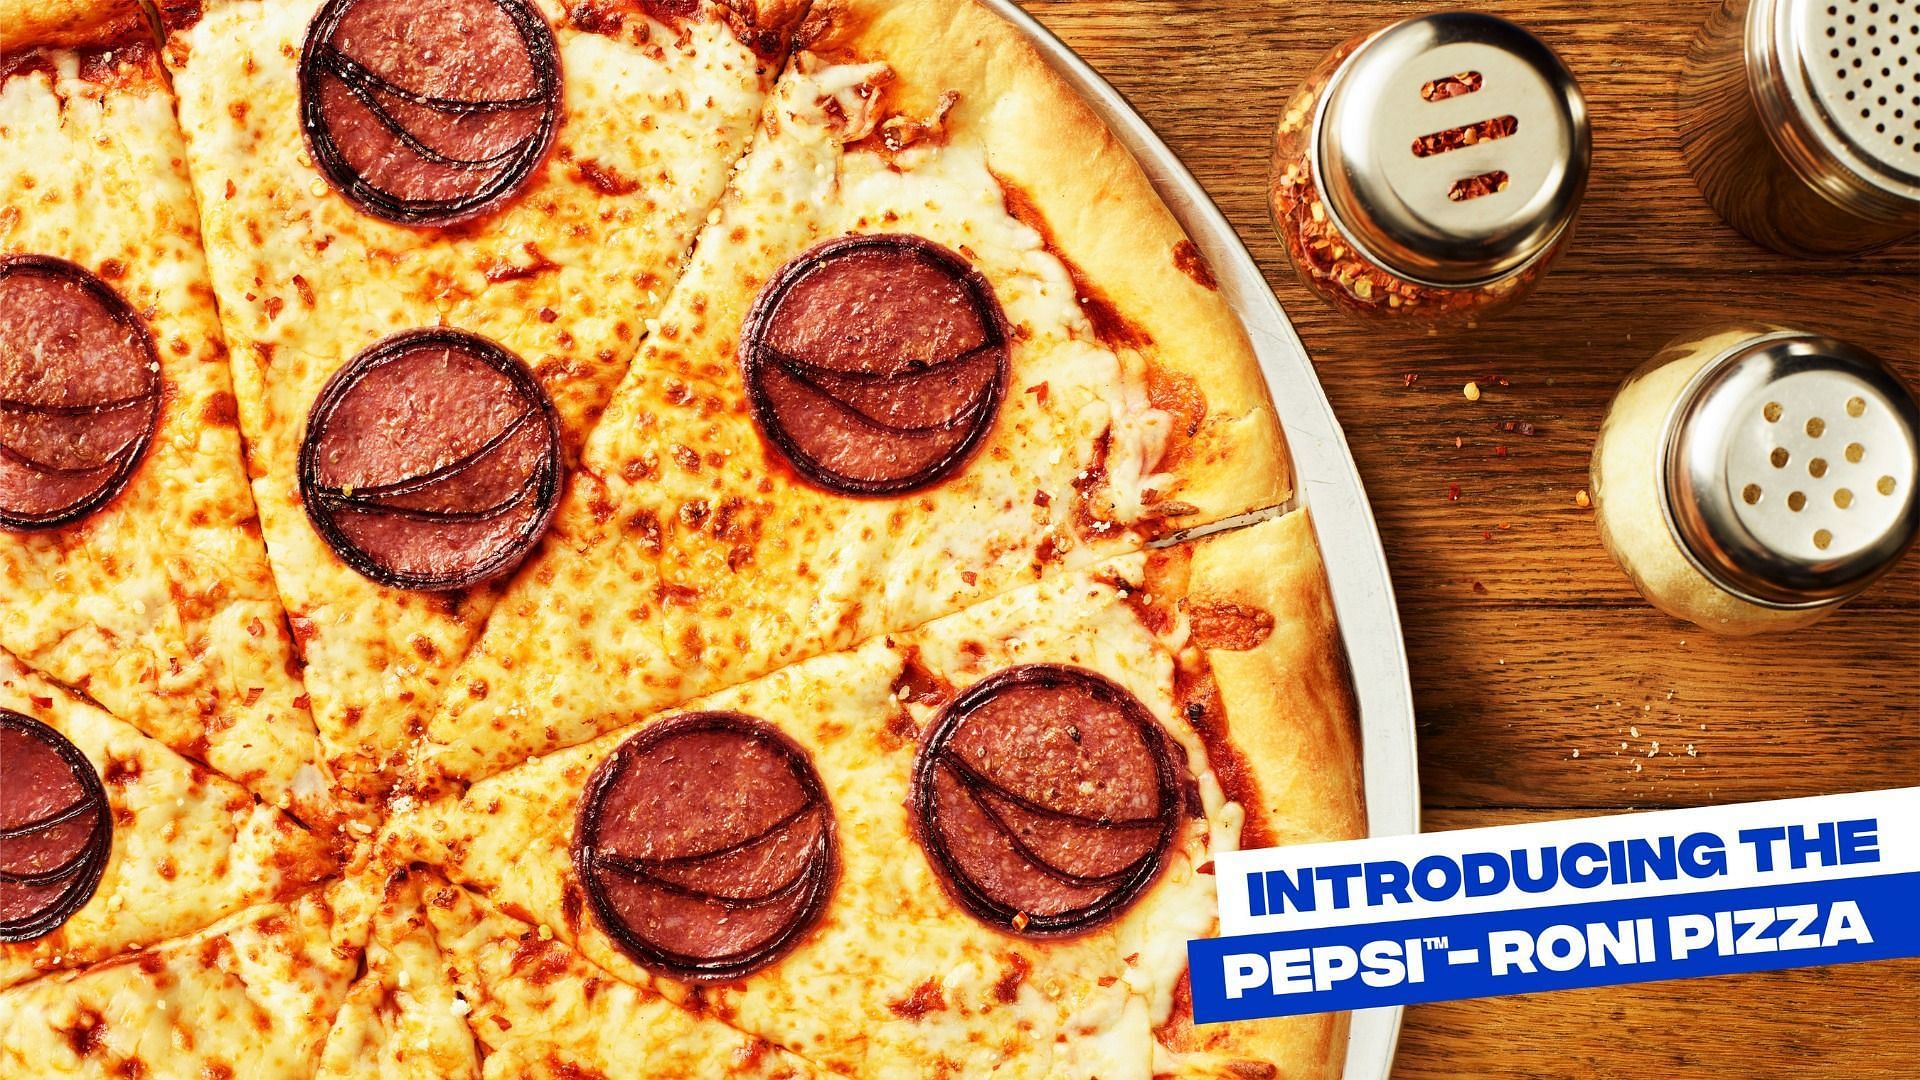 The beverage giant celebrates National Pizza Party Day on May 20 with Pepsi-Roni Pizza (Image via PepsiCo)